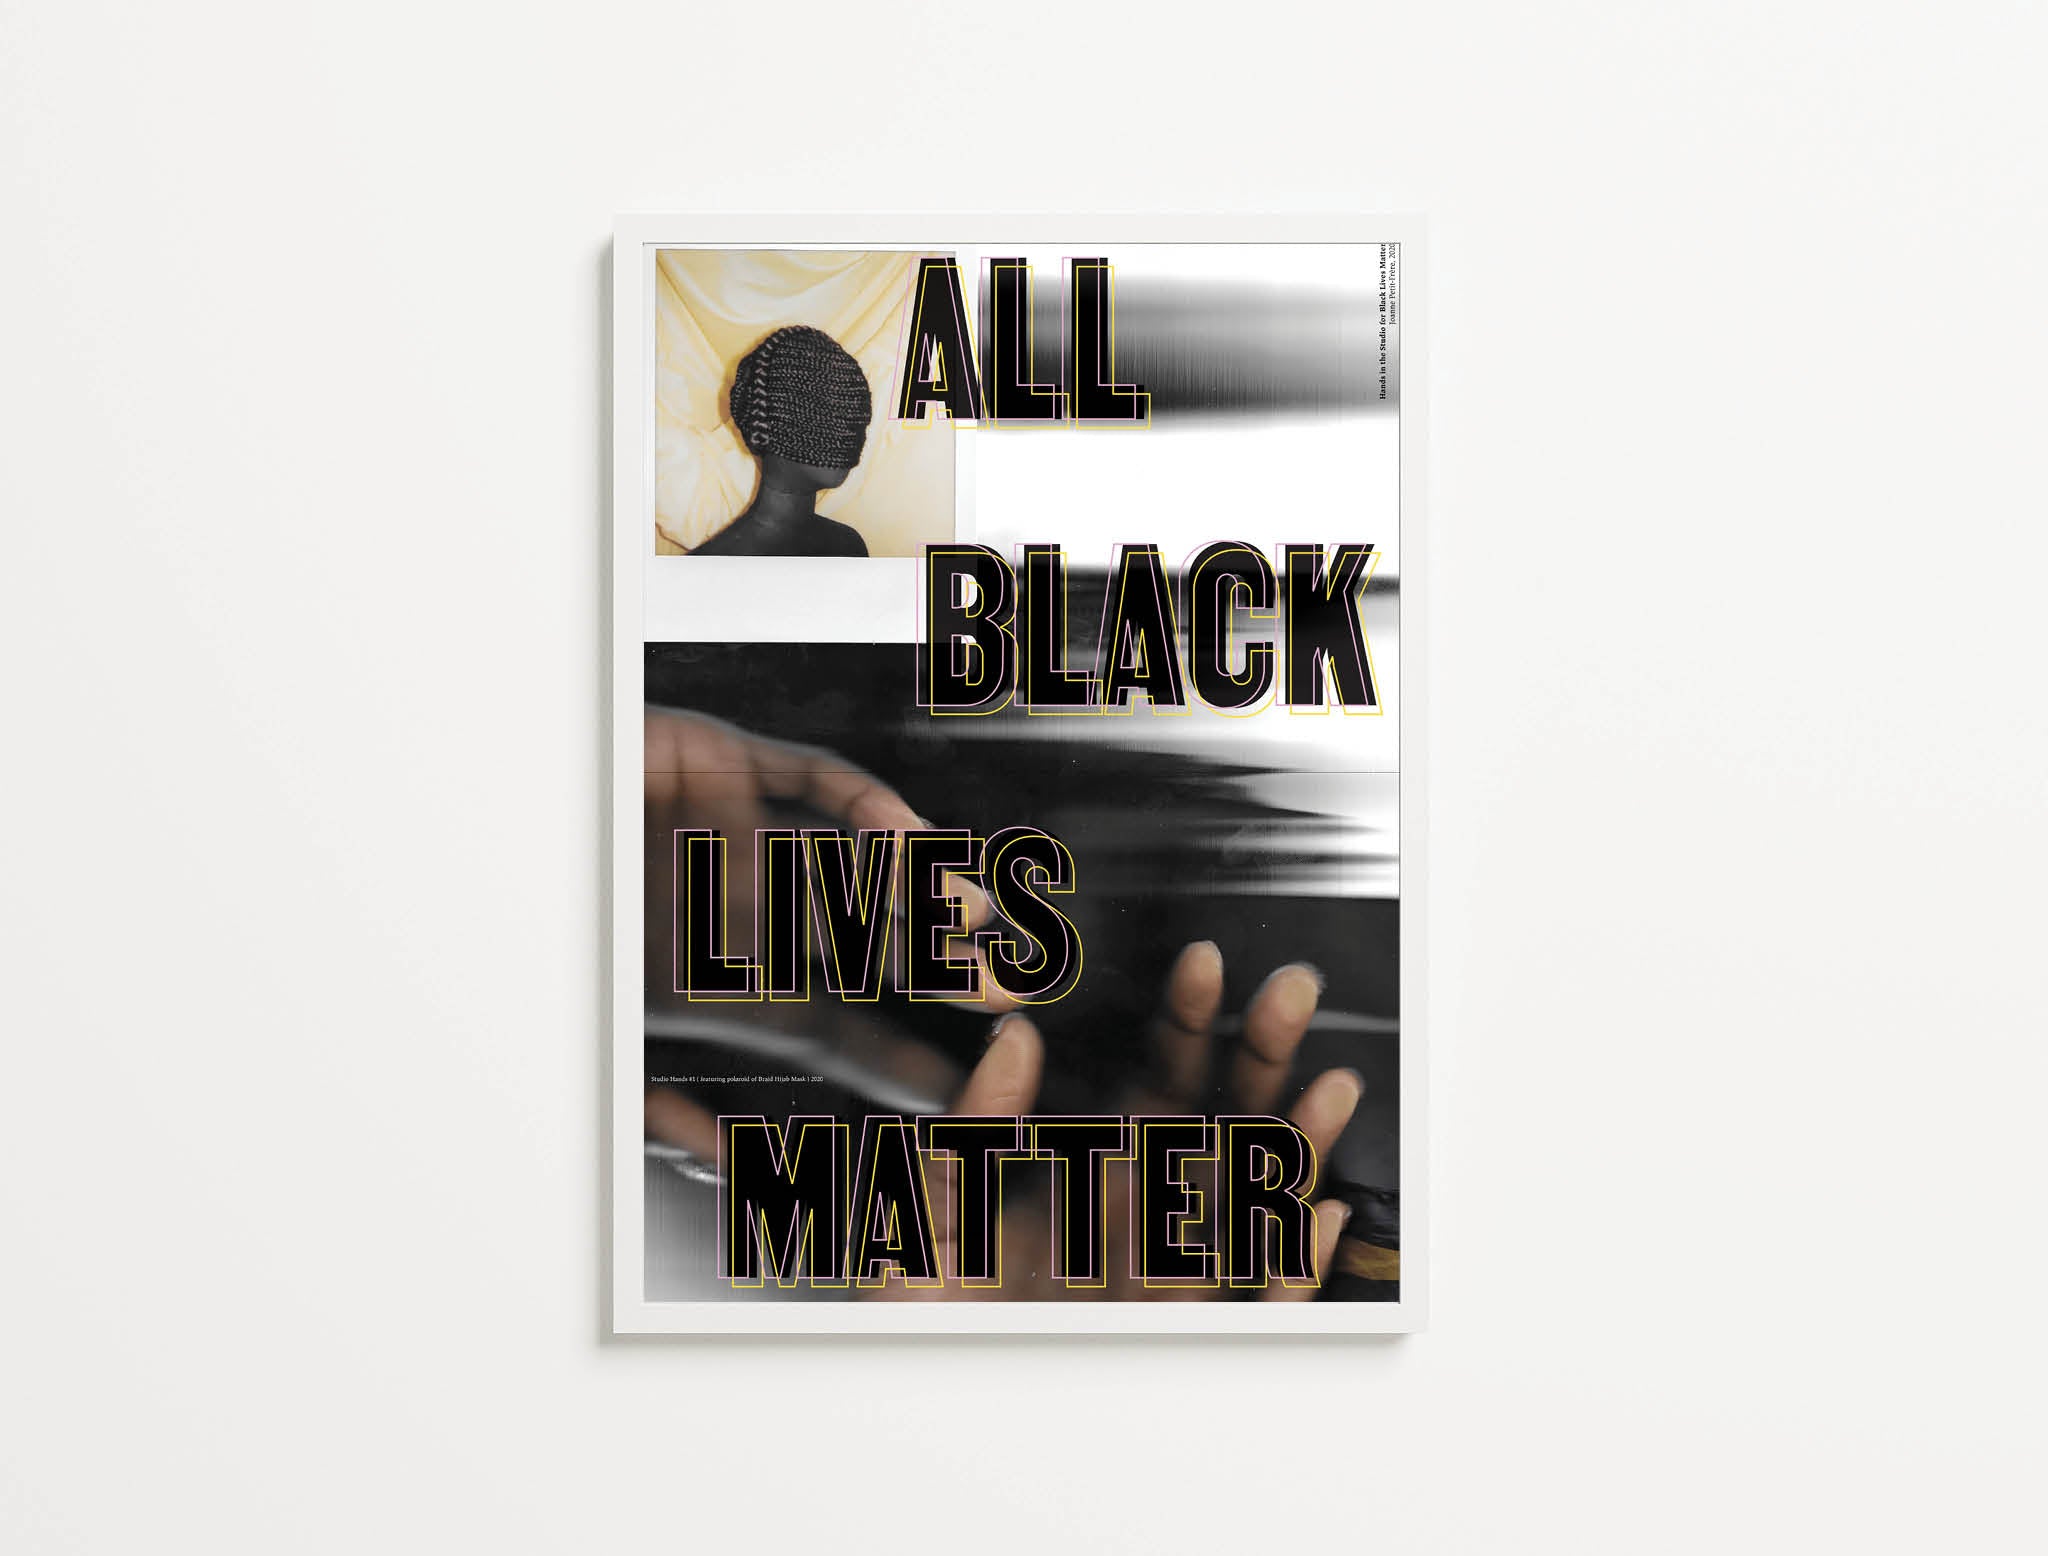 Hands In The Studio For All, Black Lives Matter, Print Ain't Dead Edition - Of Original Work, Studio Hands #1 (Featuring Polaroid Of Braid Hijab Mask), 2020